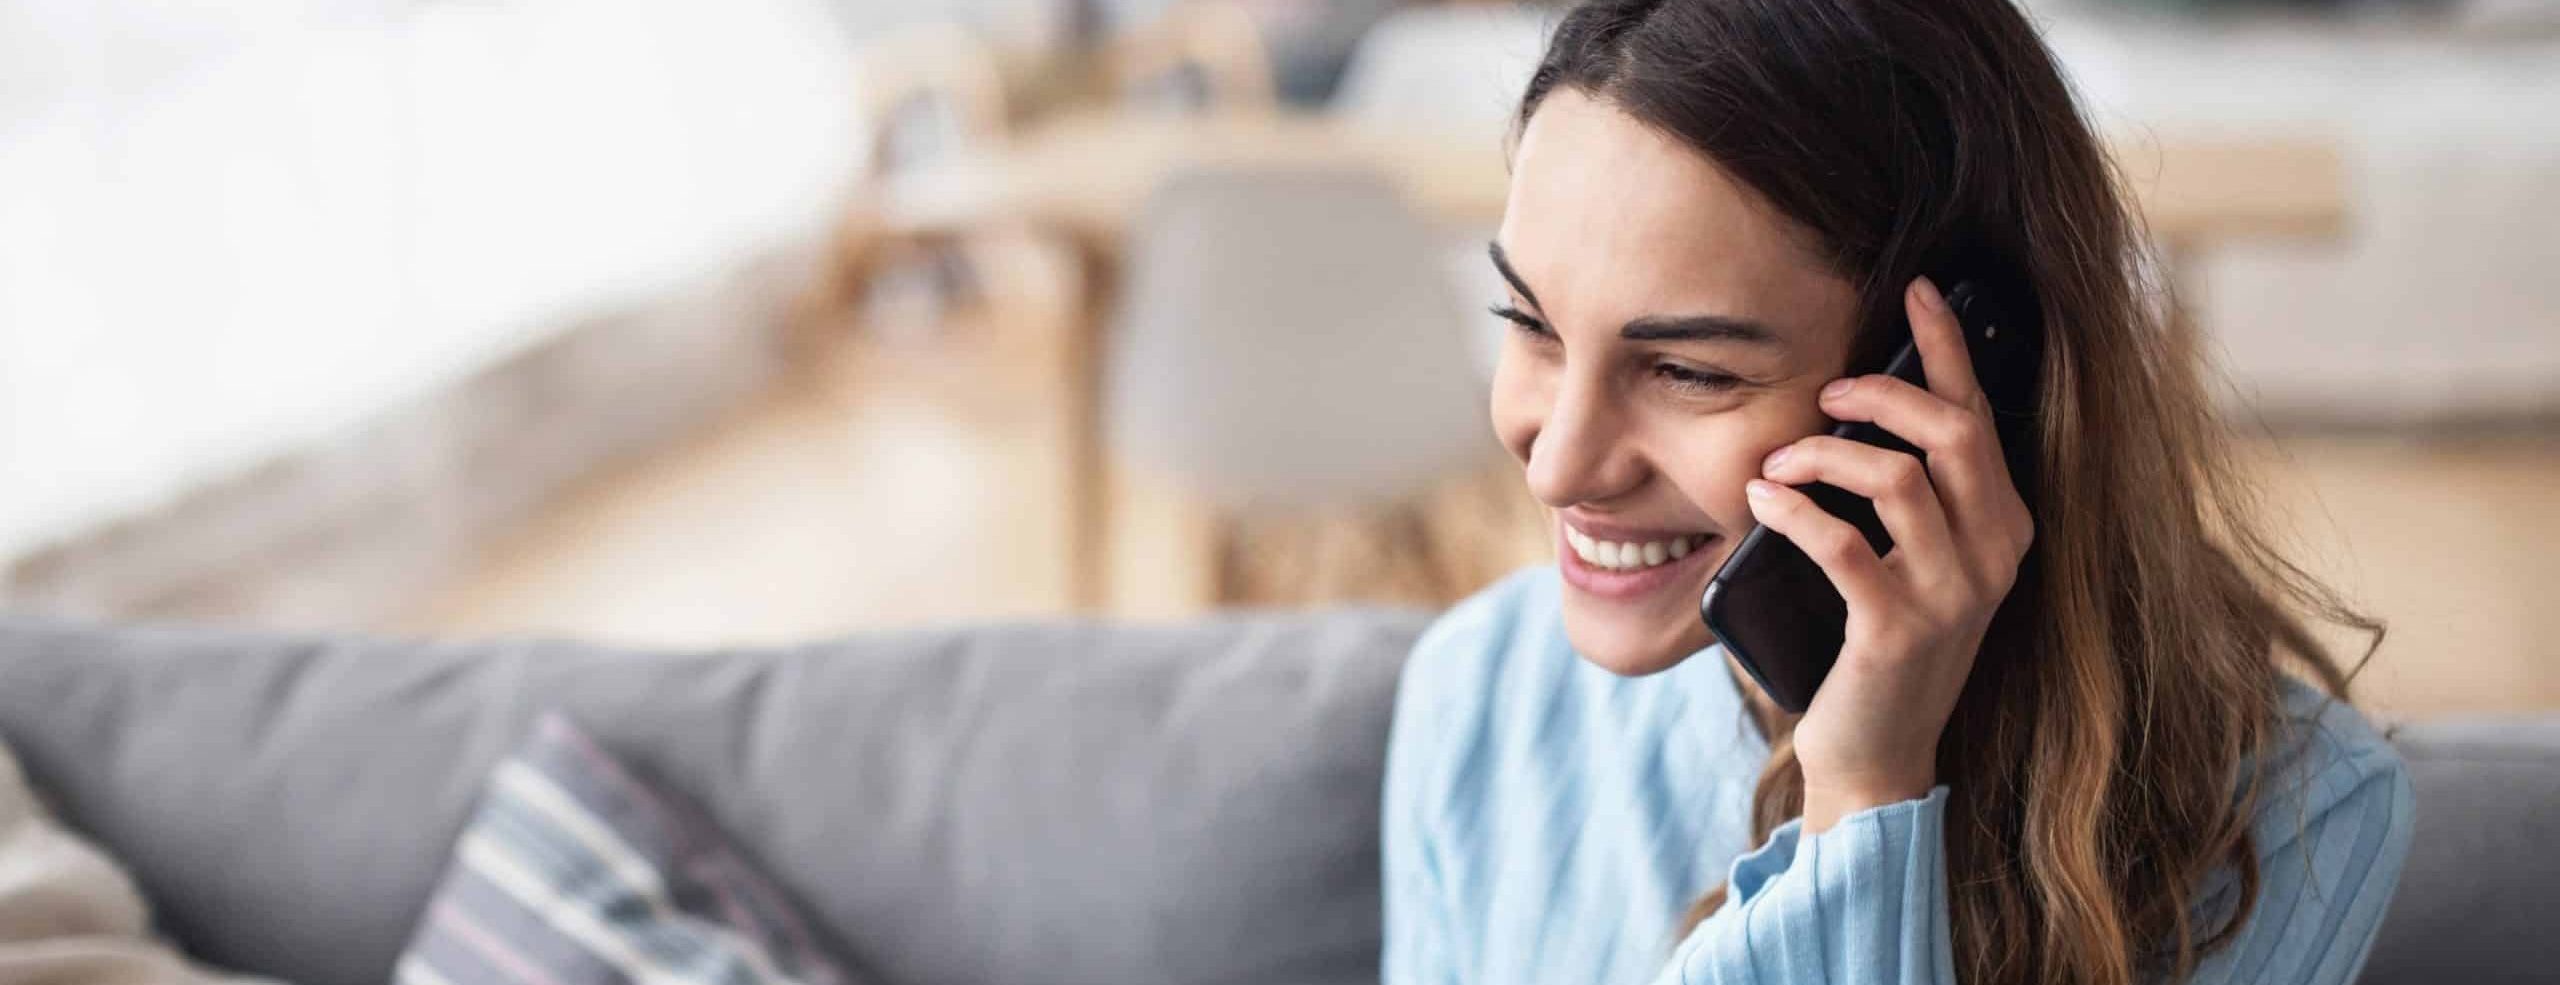 Attractive smiling woman talking on the phone at home. Technology, communication and coziness concept.